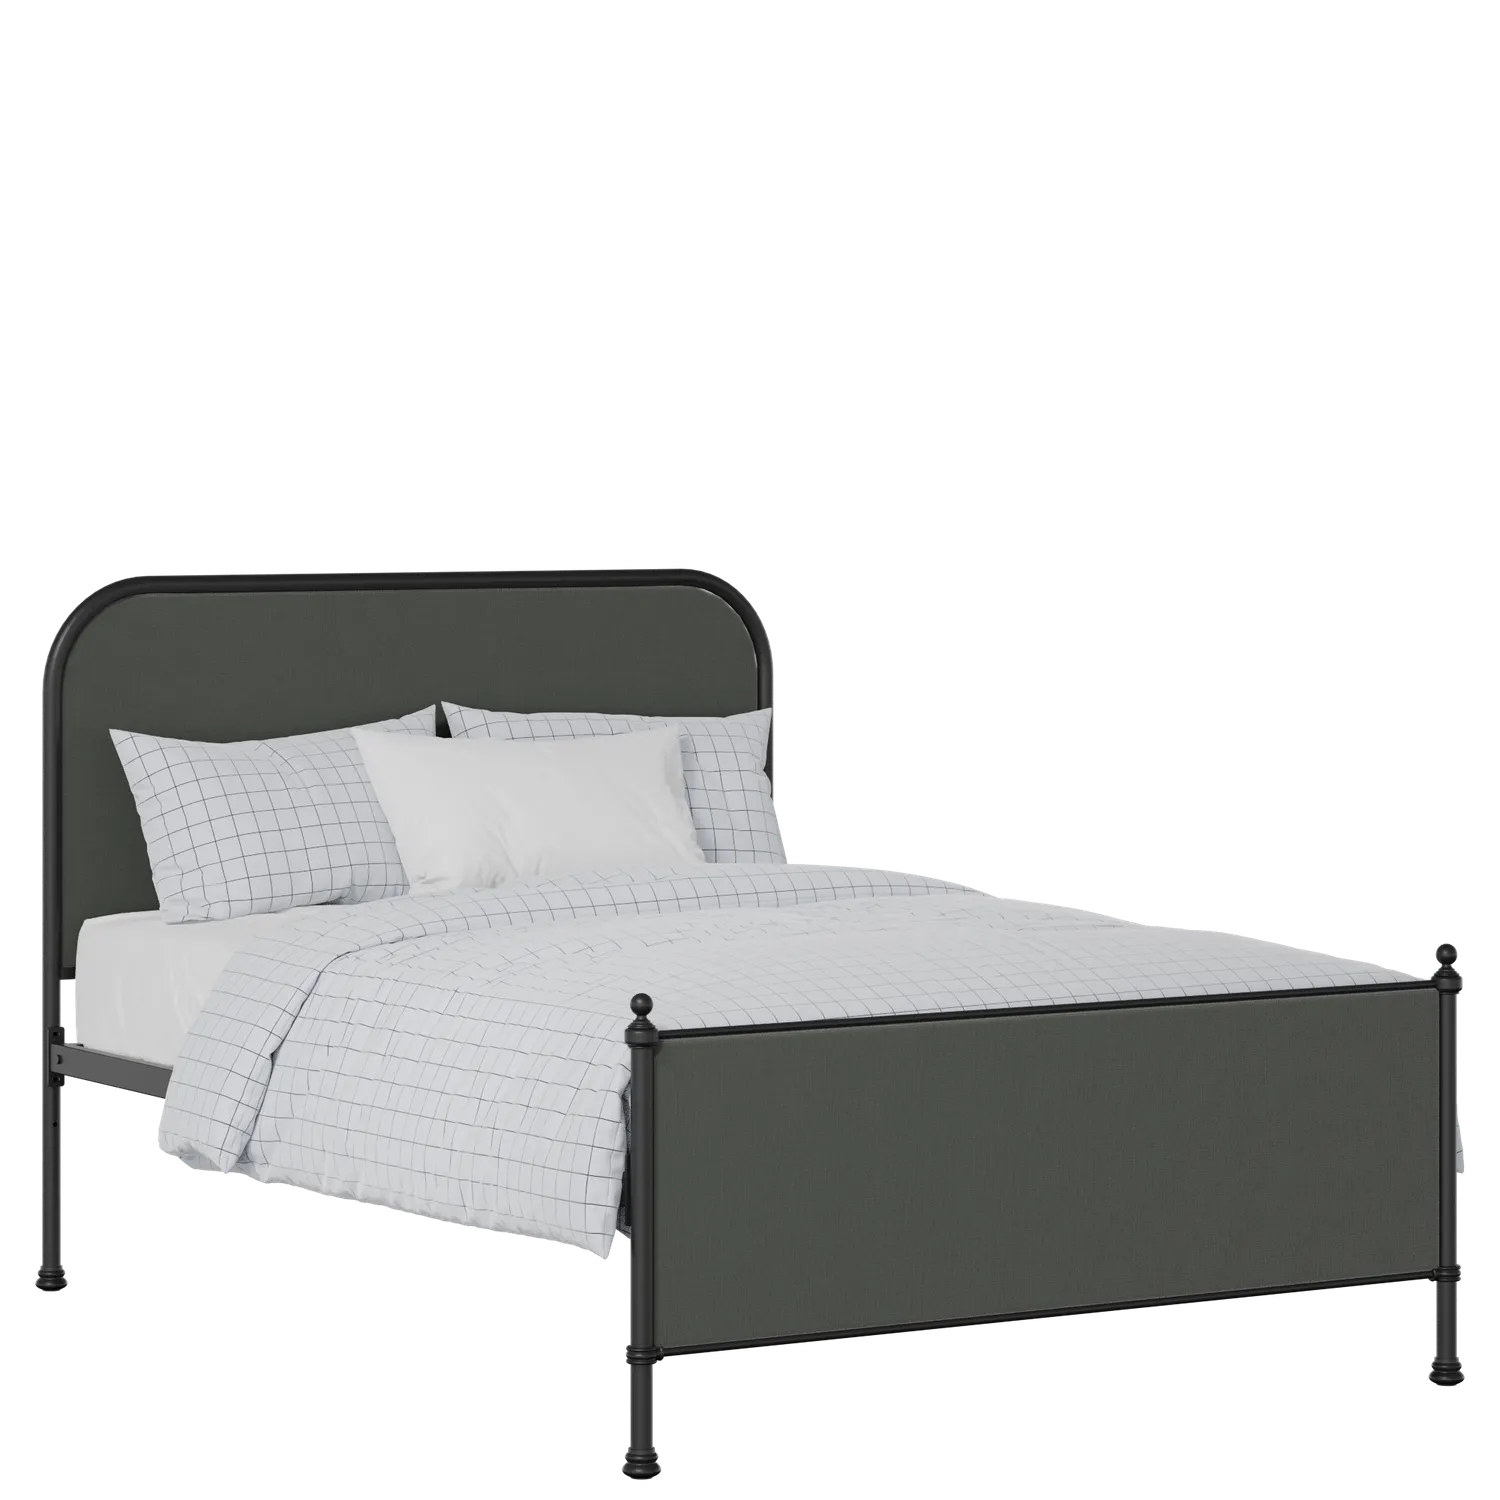 Bray iron/metal upholstered bed in black with iron fabric